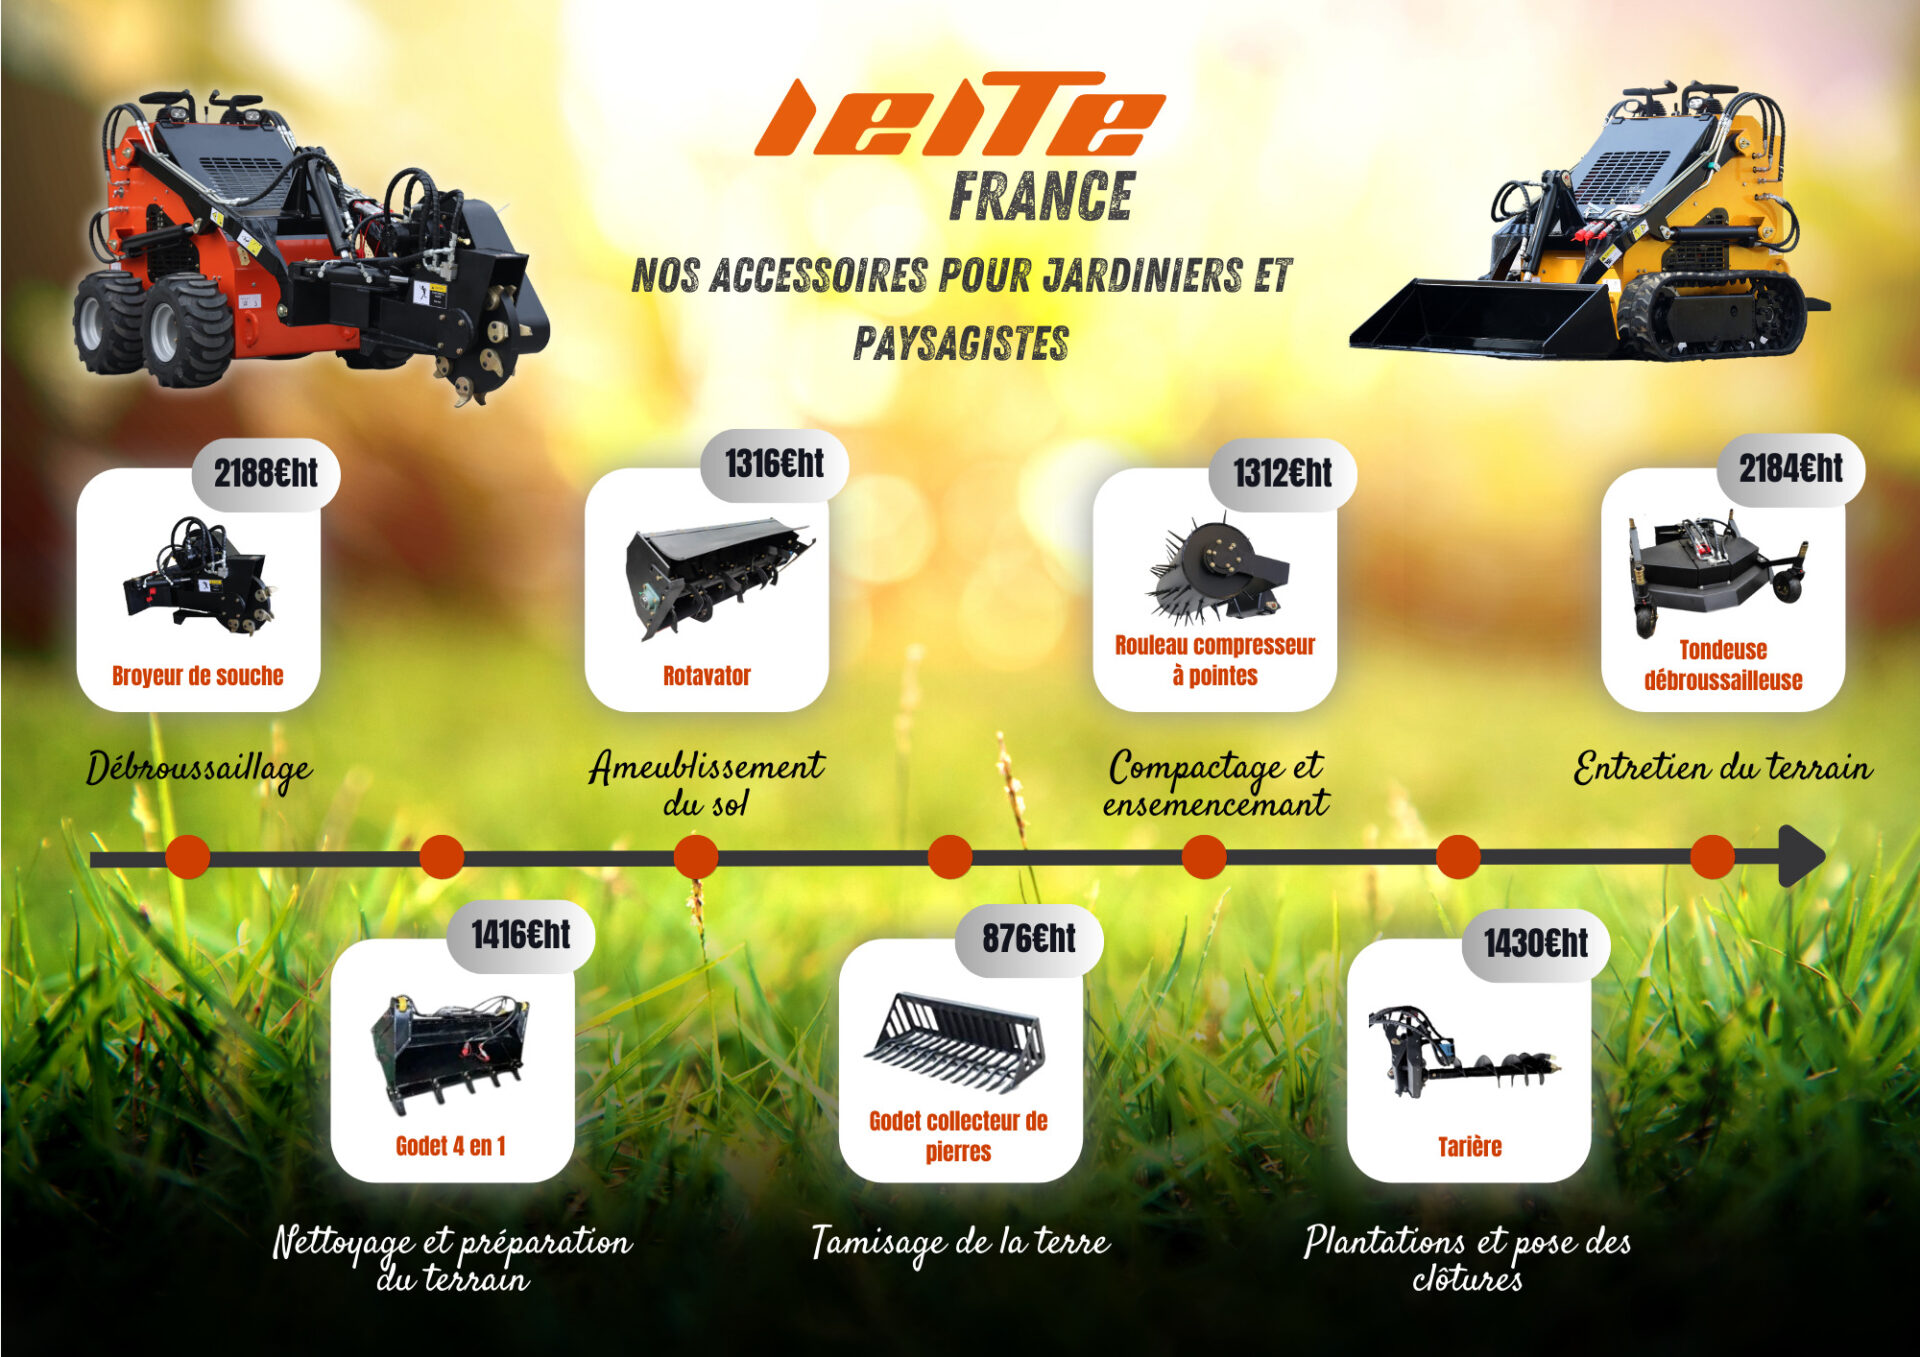 Leite accessories for gardeners and landscapers